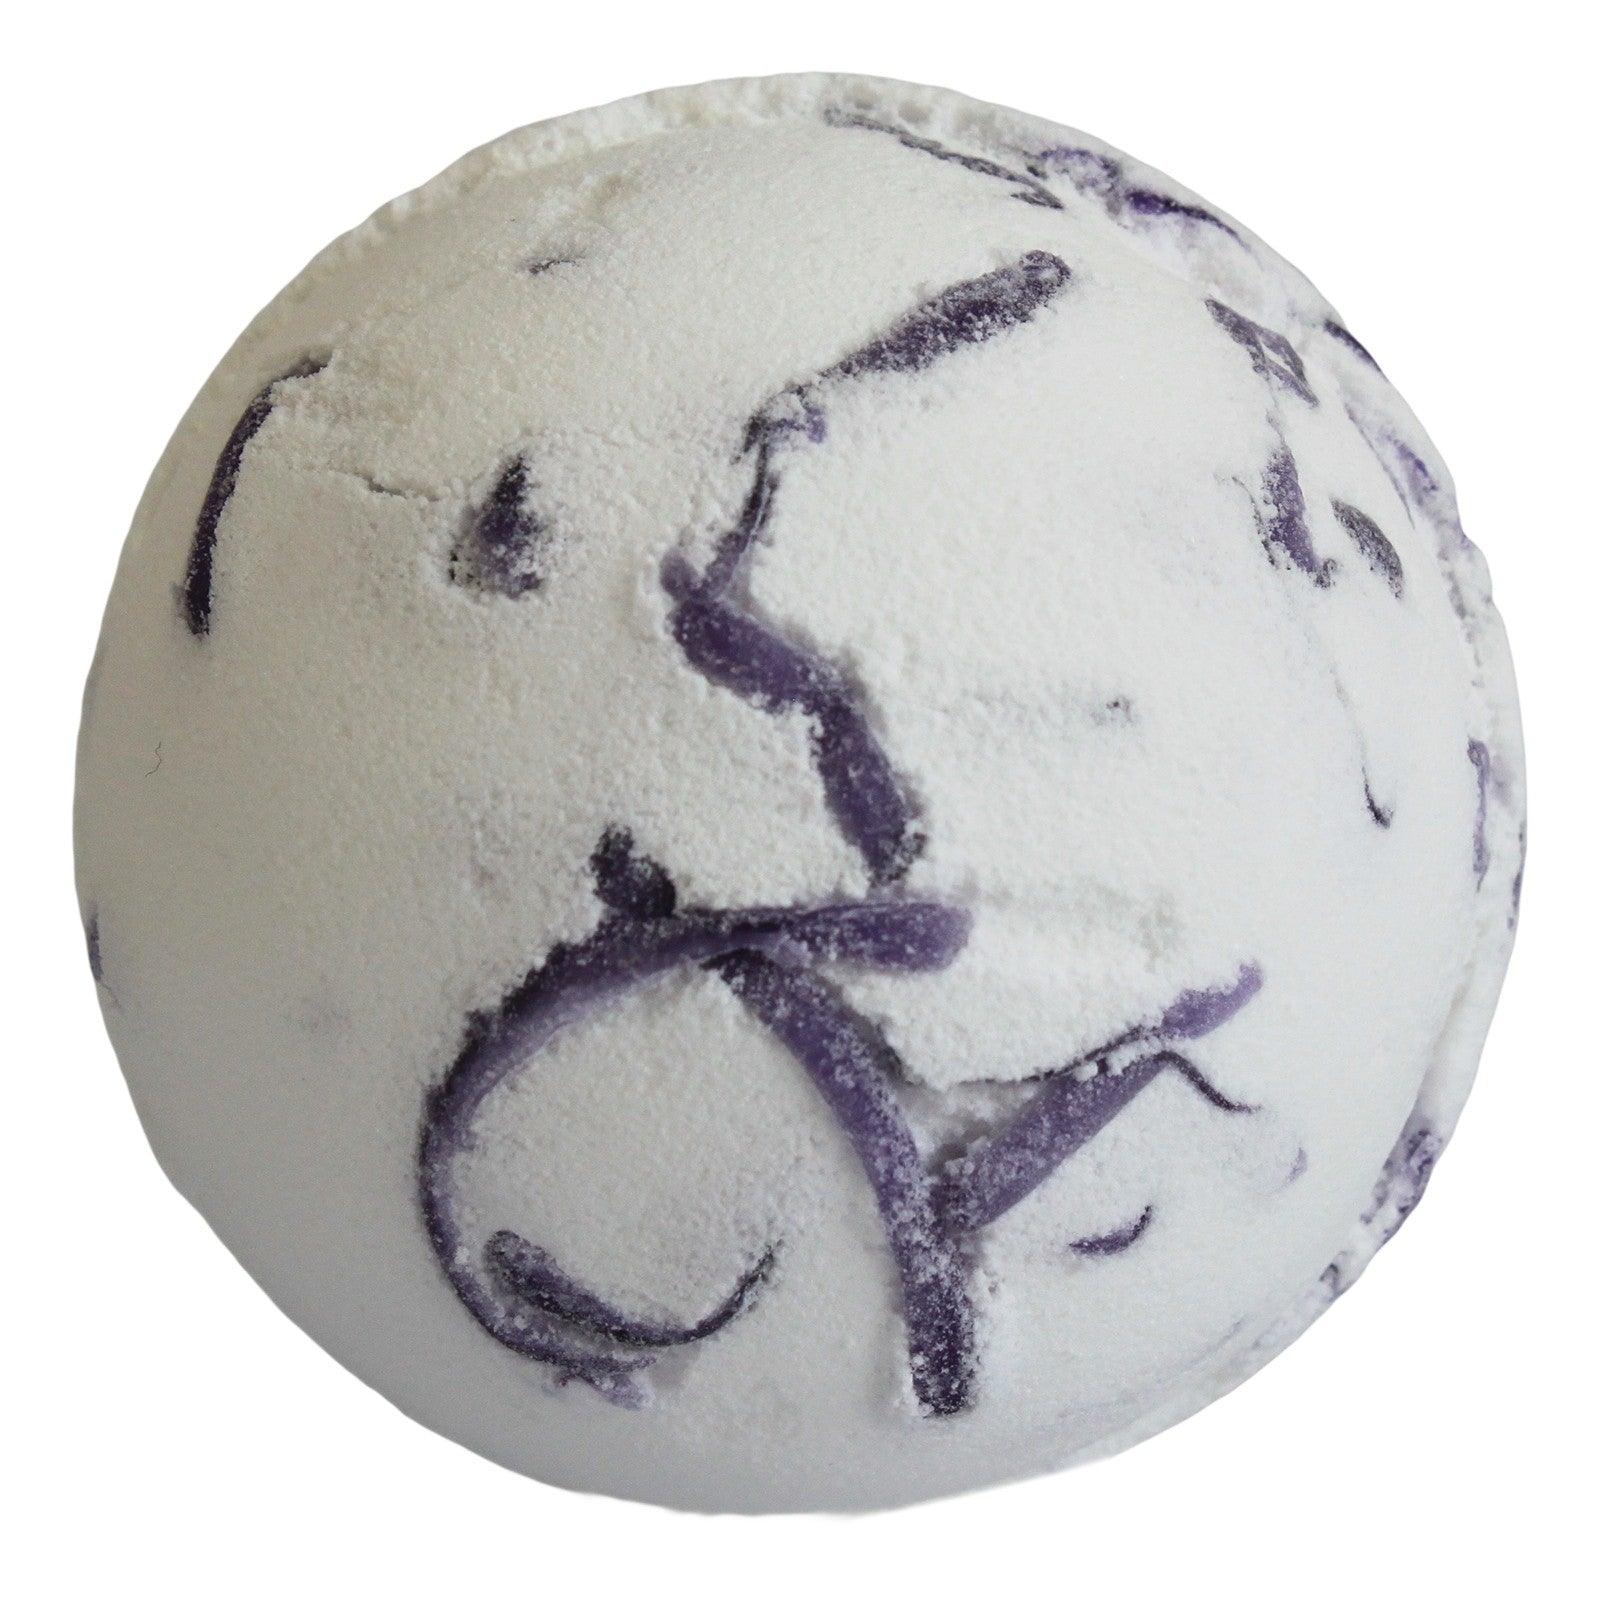 Tropical Paradise Coco Bath Bomb - Mangosteen - DuvetDay.co.uk